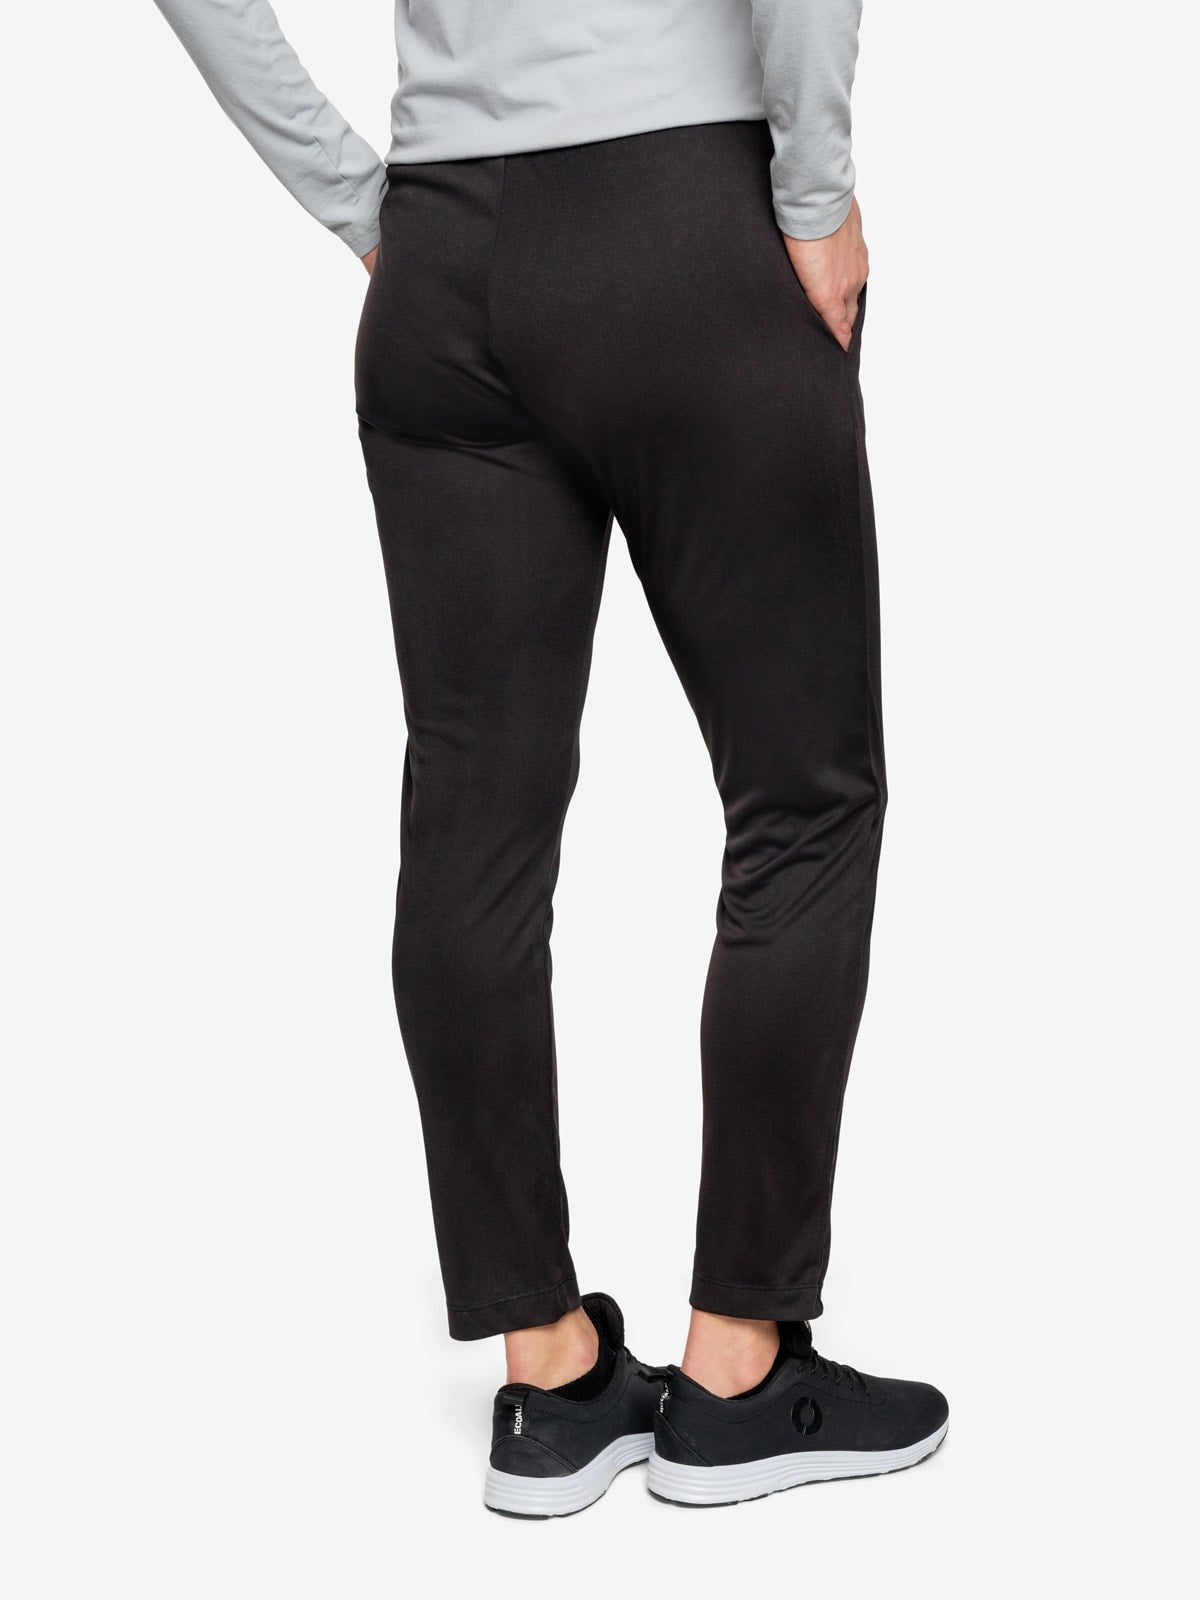 Insect Shield Women's Tech Ankle Pants